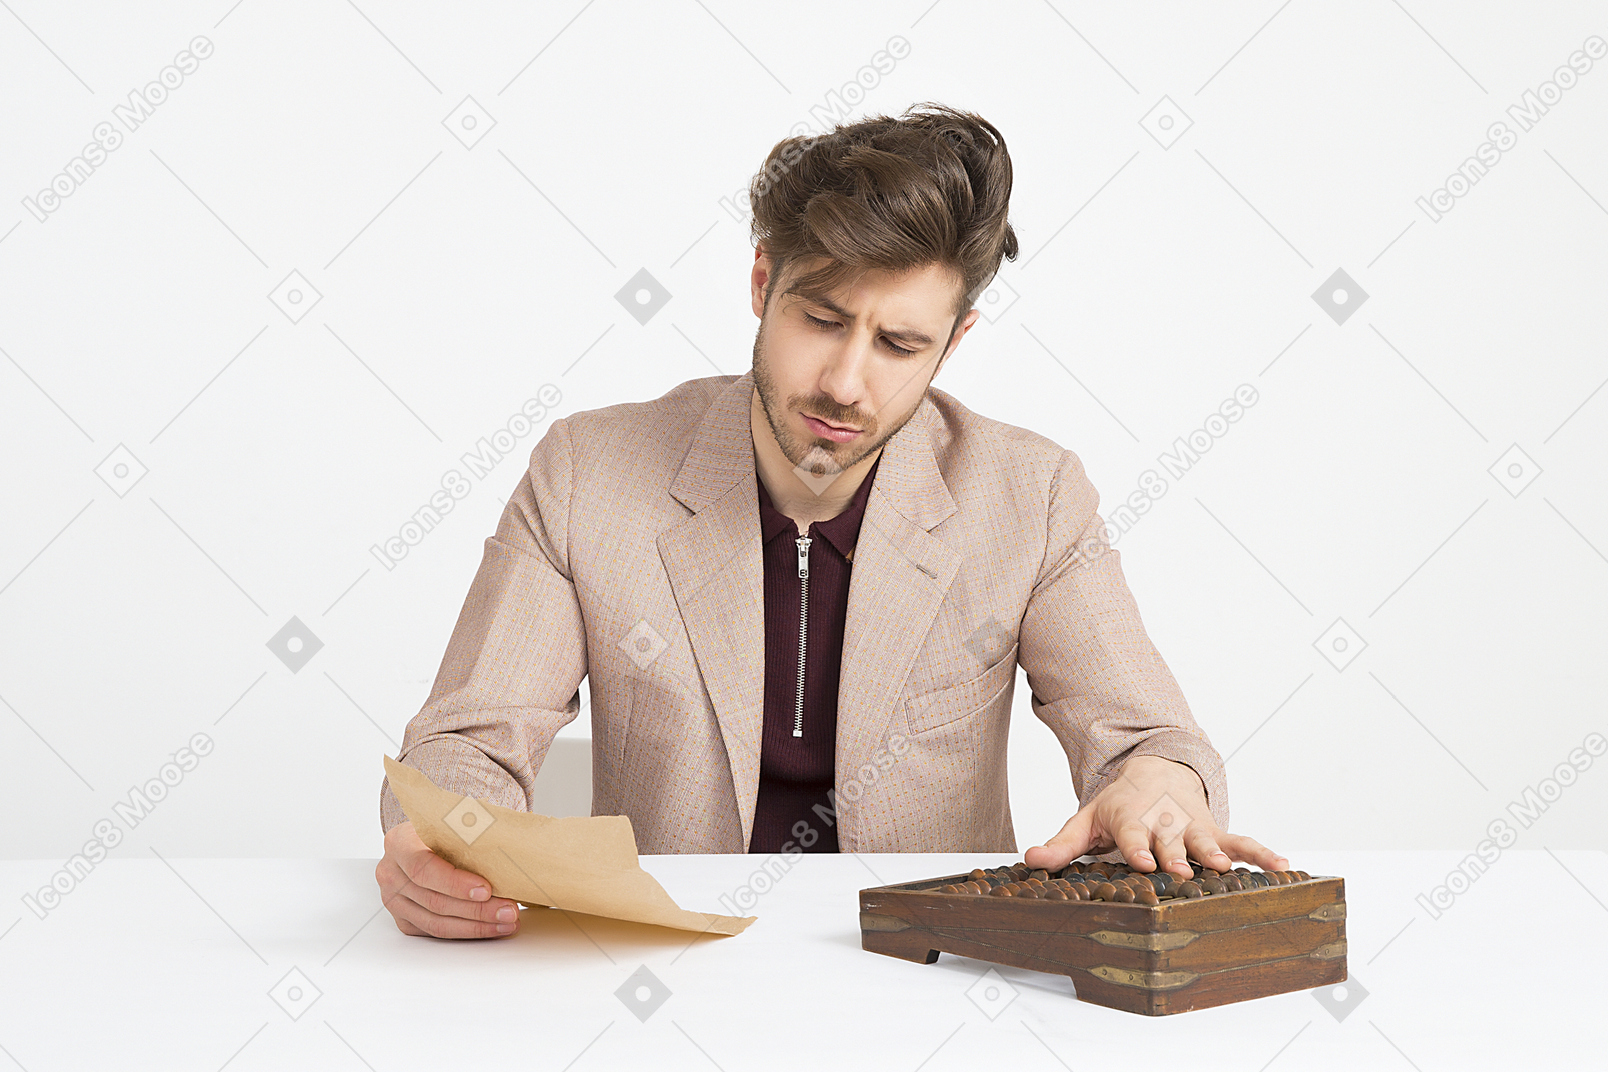 Accountant calculating with abacus